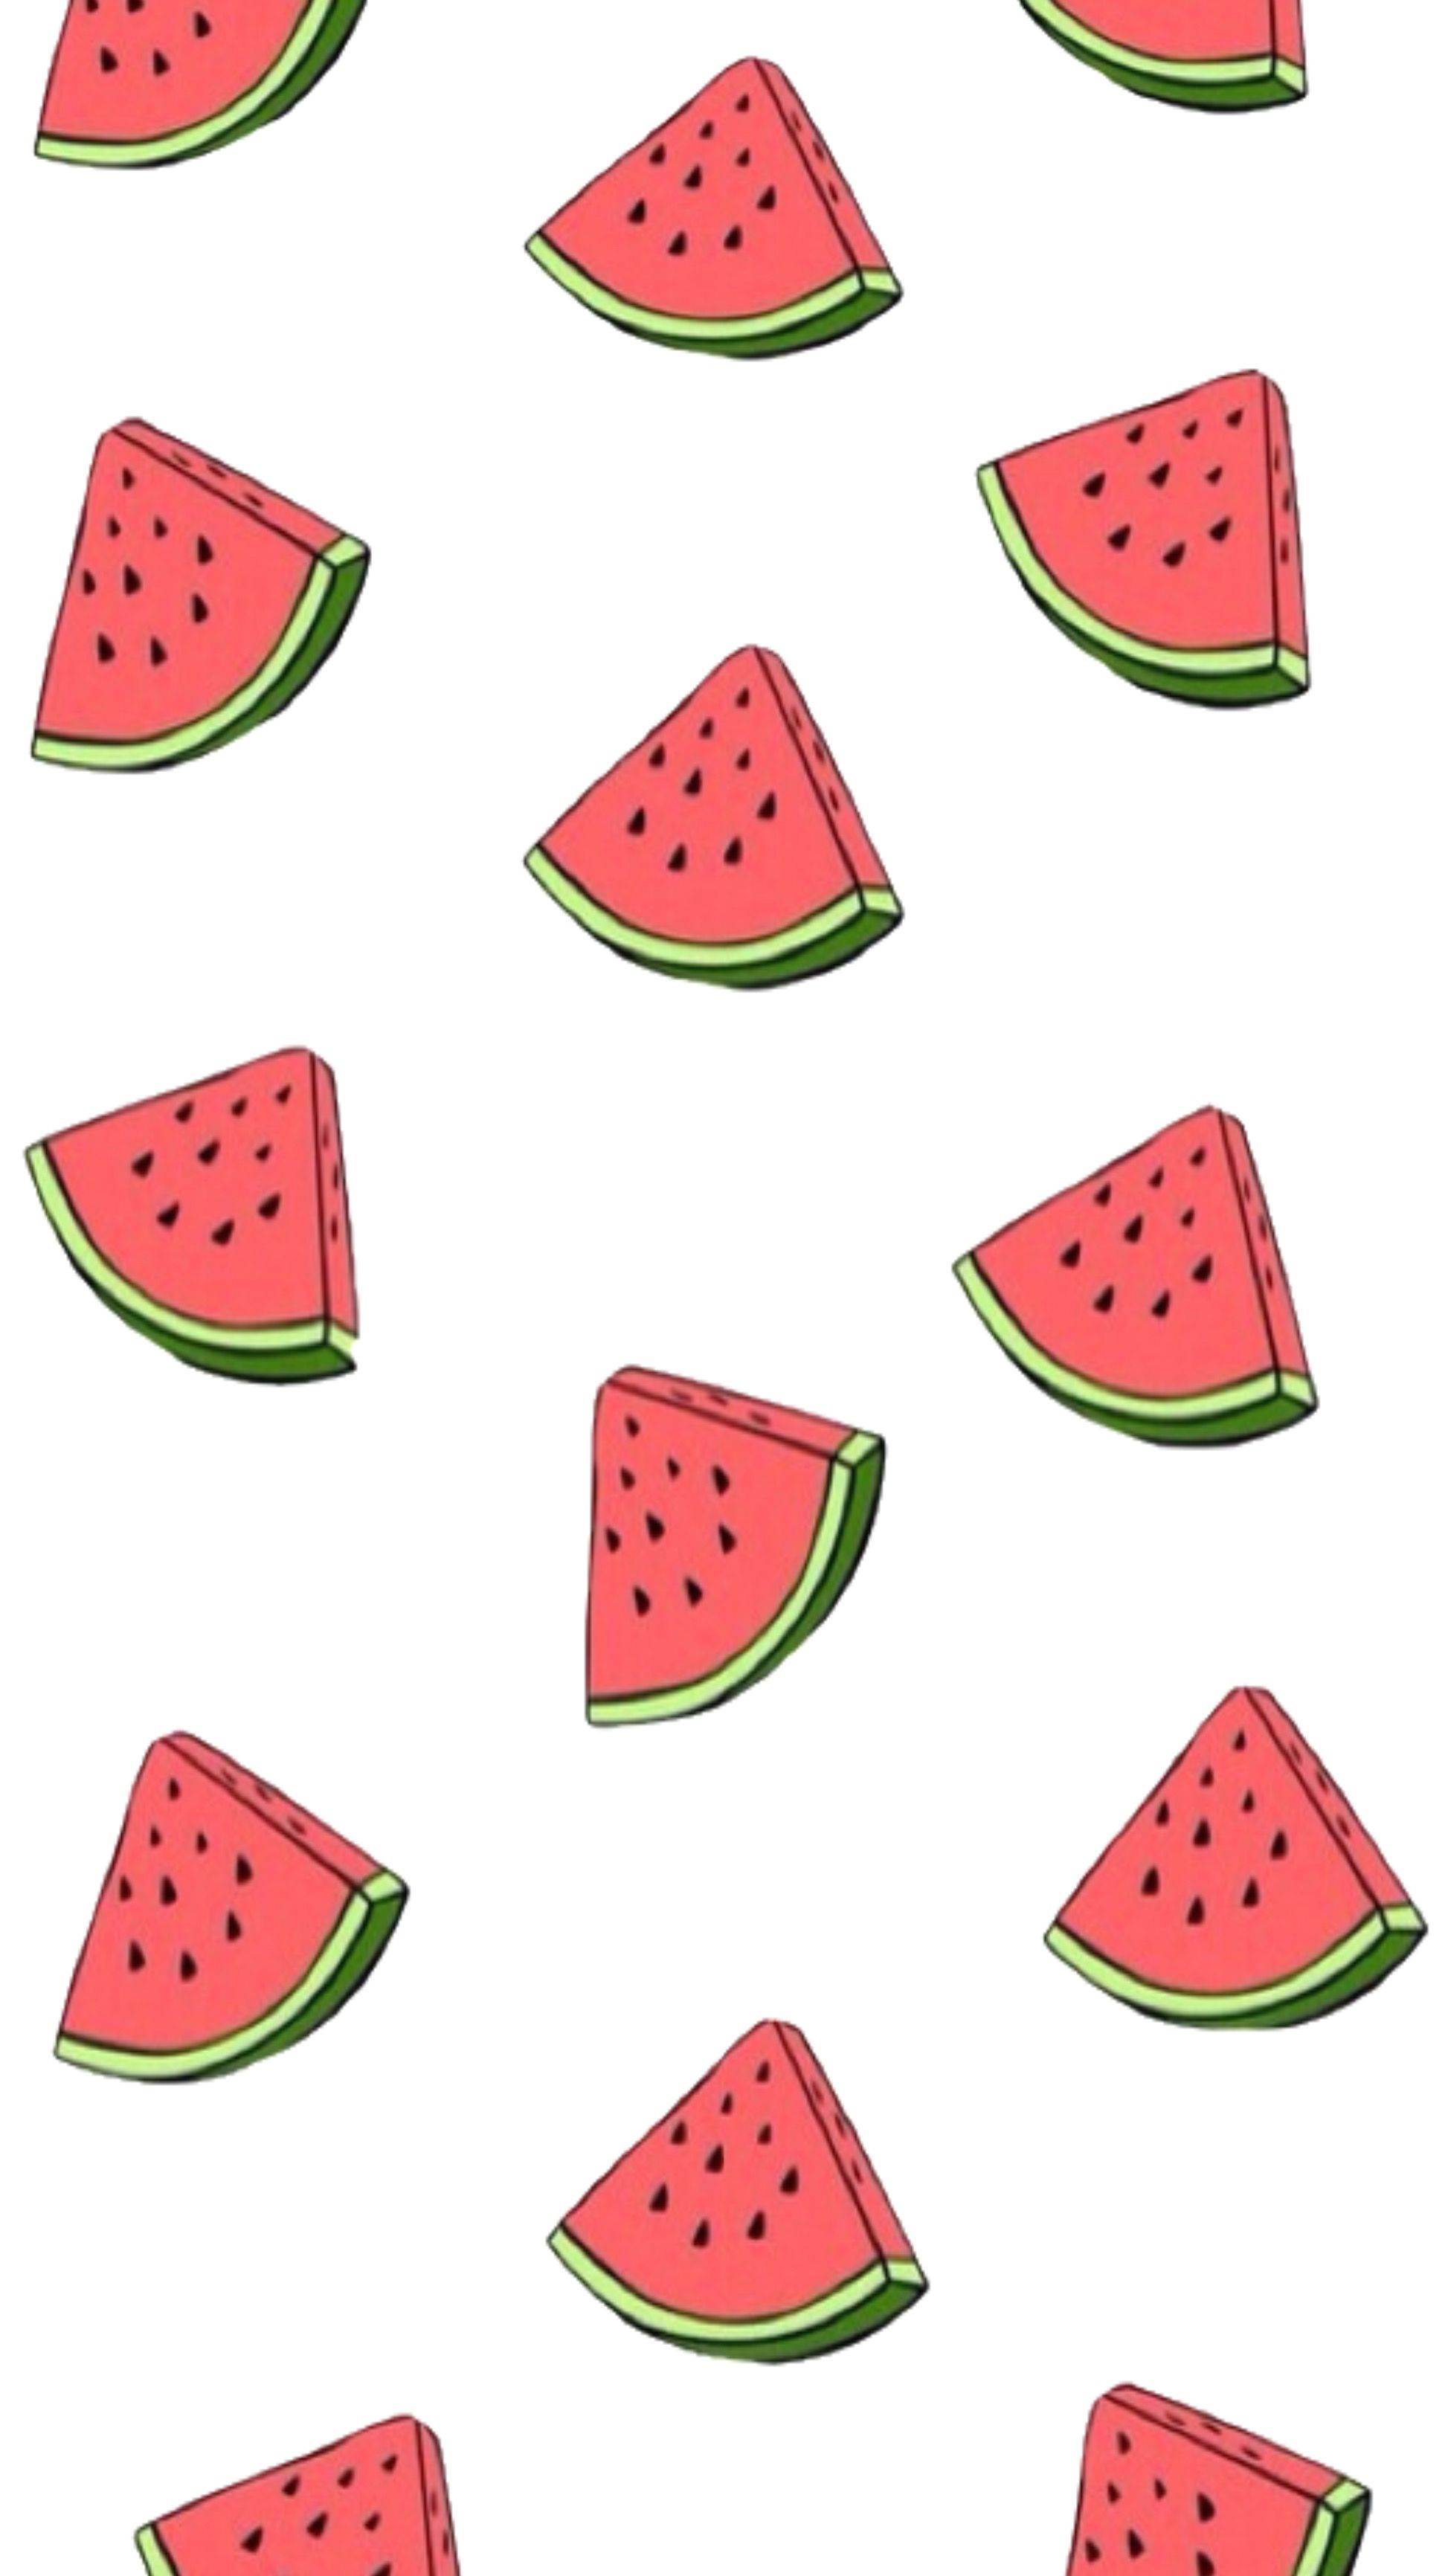 Watermelon pattern with slices of fruit - Watermelon